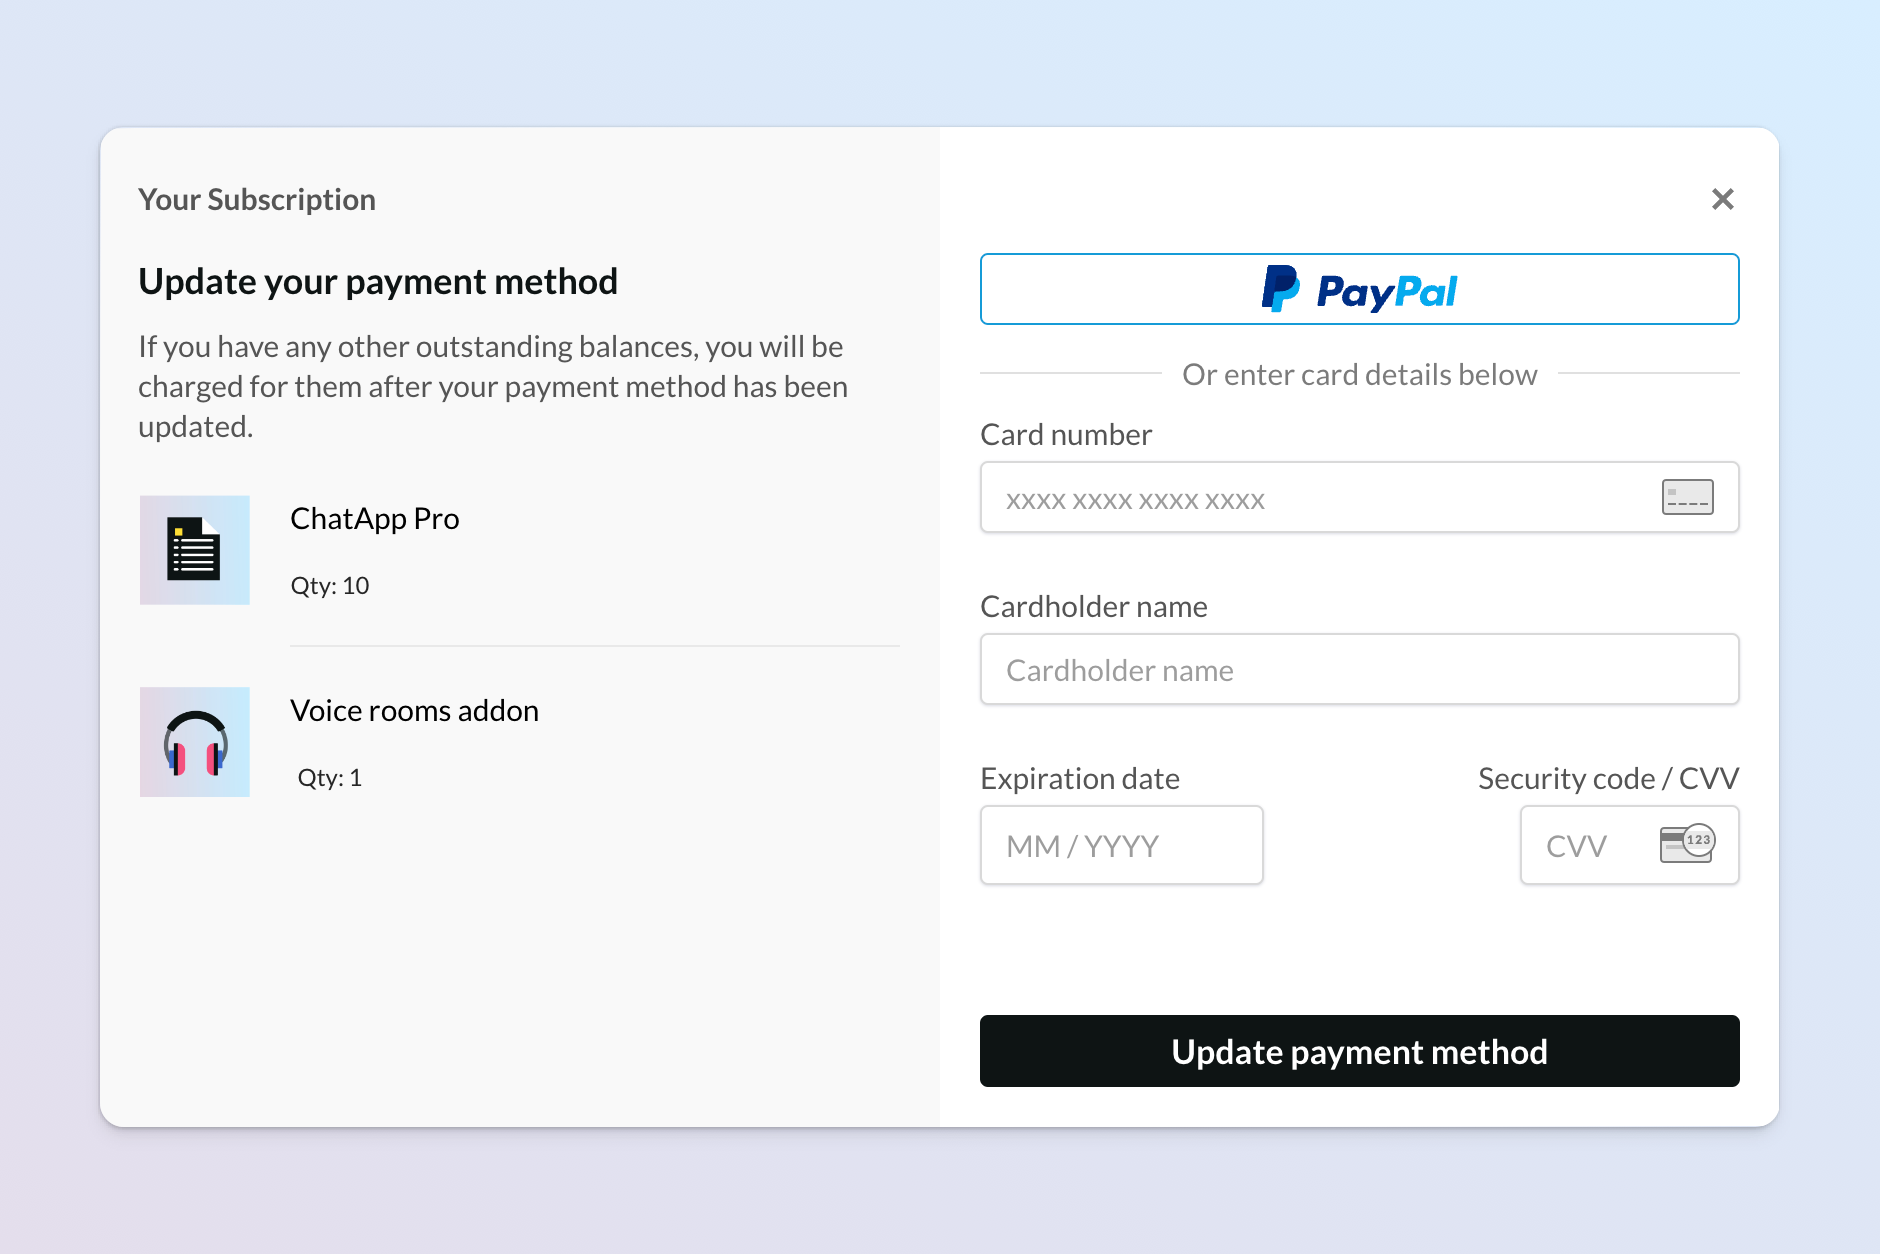 Screenshot of an overlay checkout for an update payment method transaction